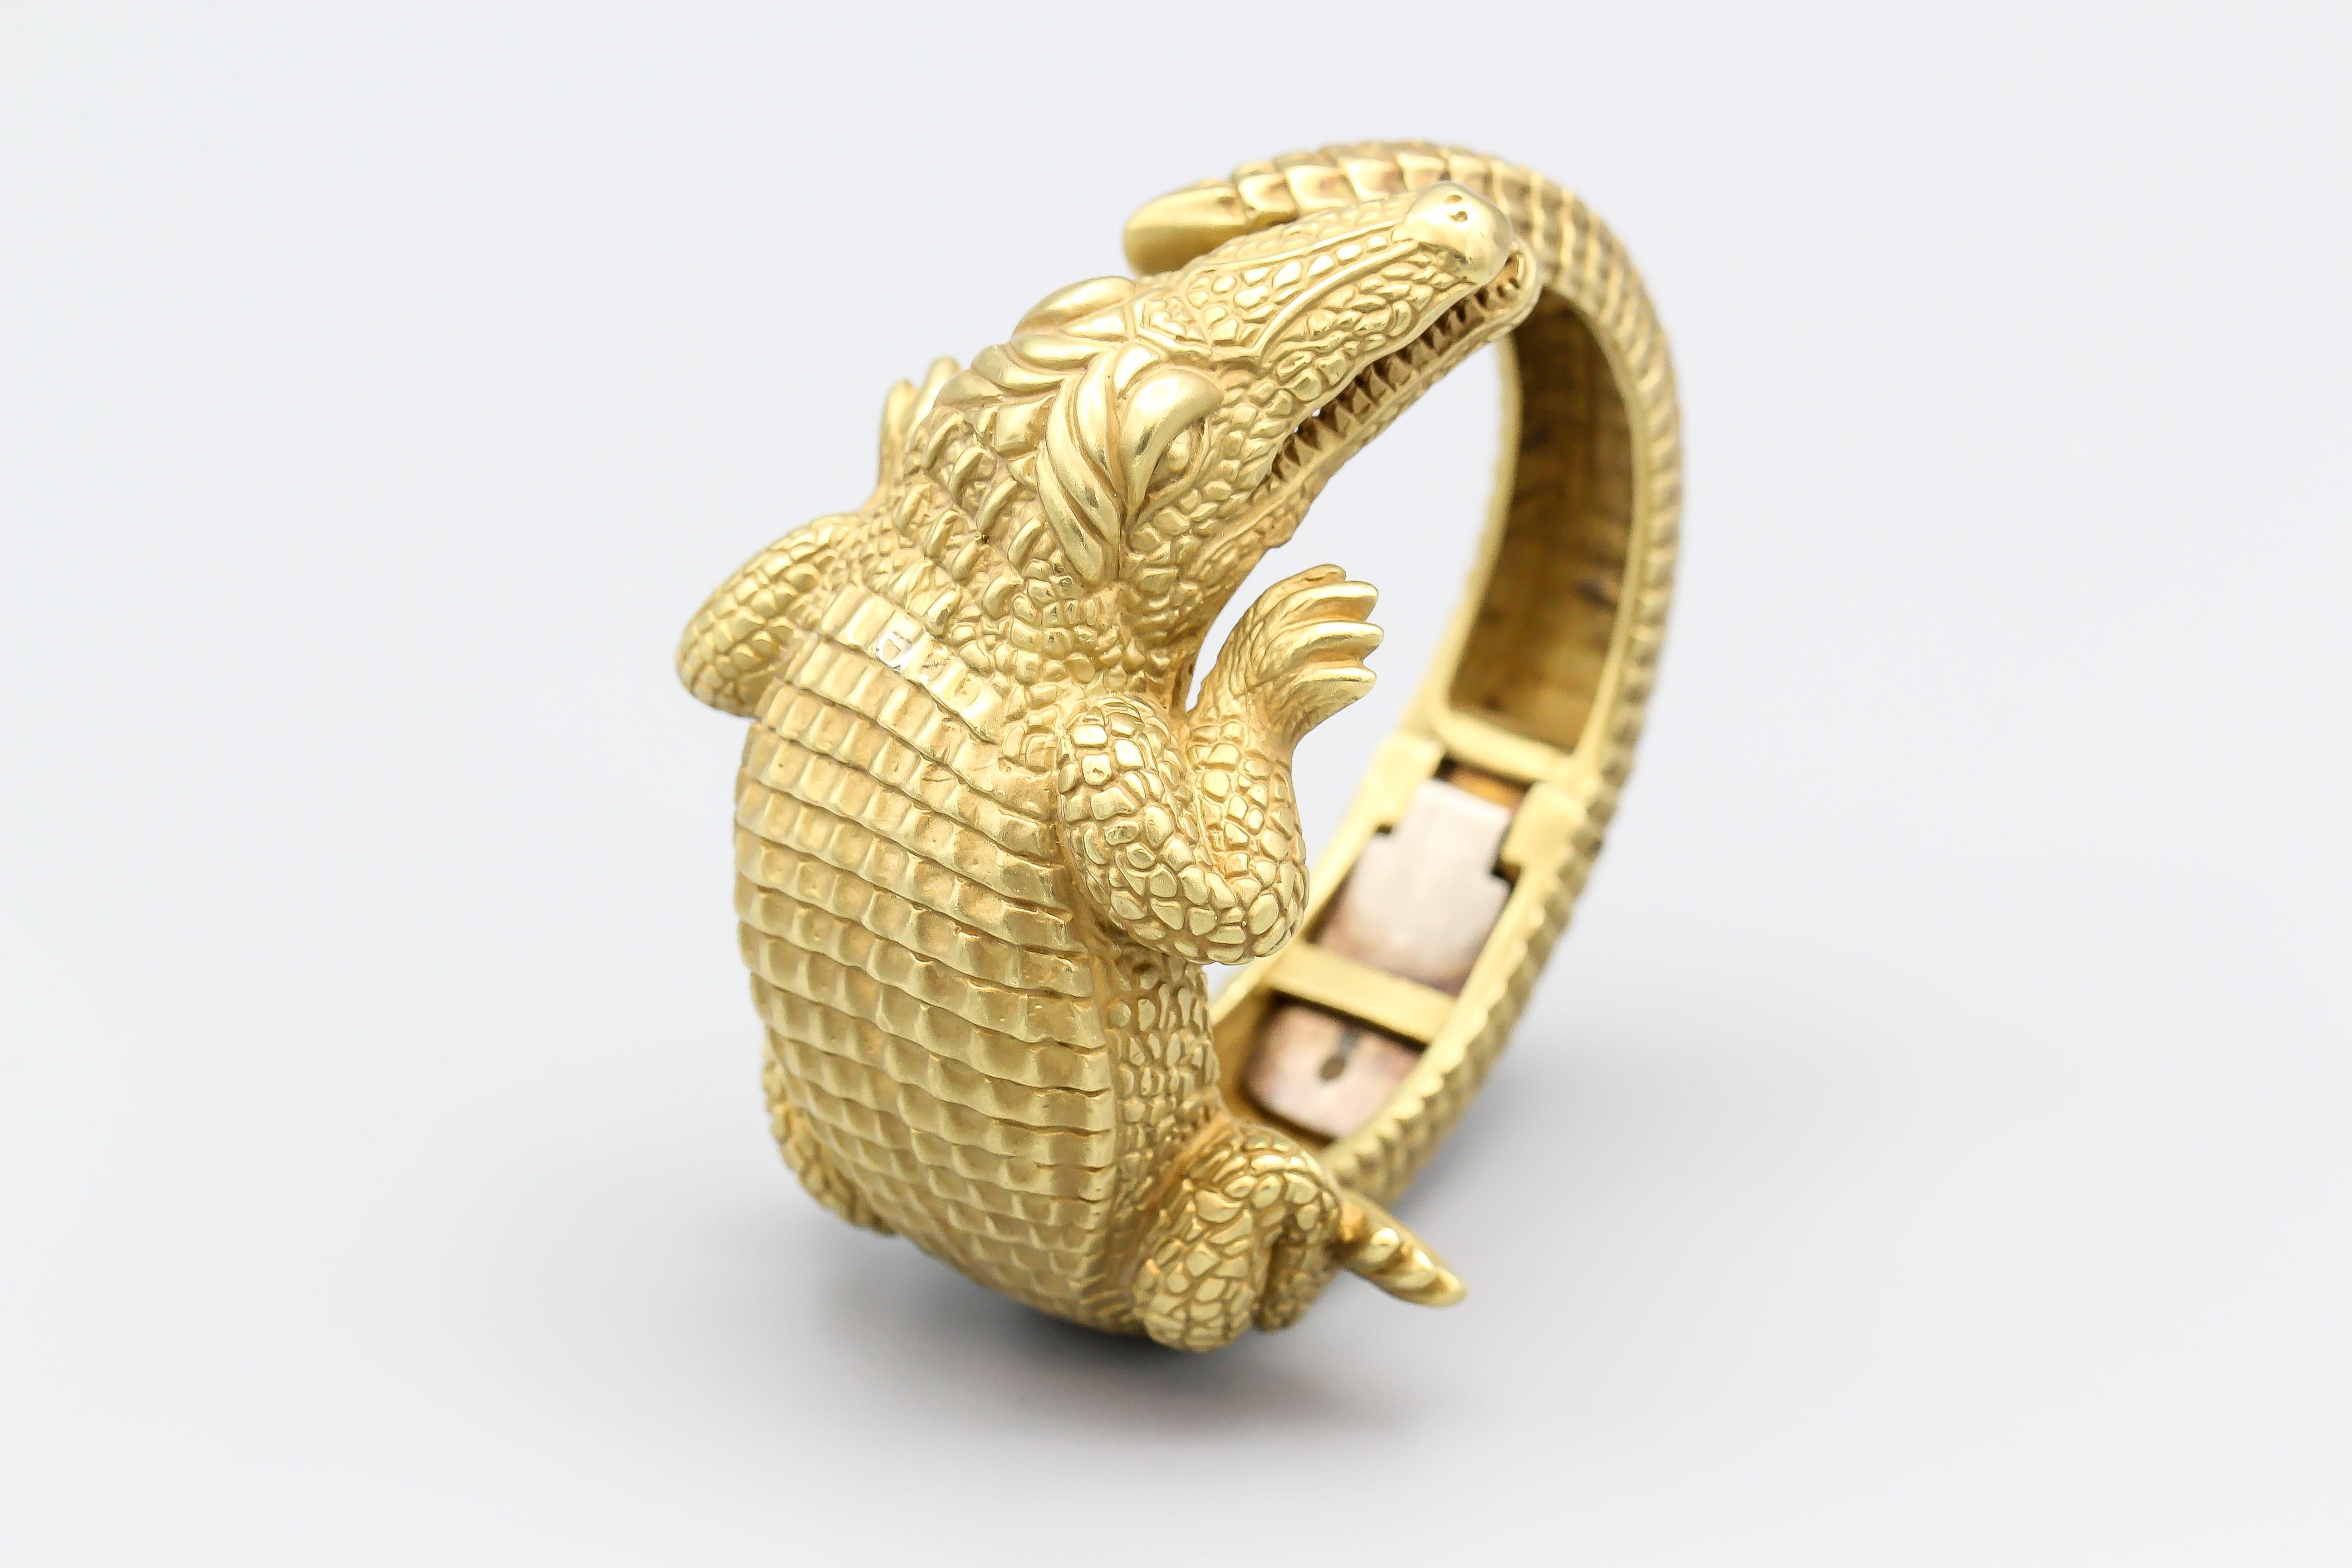 Fine 18K gold alligator cuff bracelet by Kieselstein-Cord, circa 1980s. At approx. 187 grams, we believe this to be the largest size made available of this model bracelet.  It will comfortably fit a 6